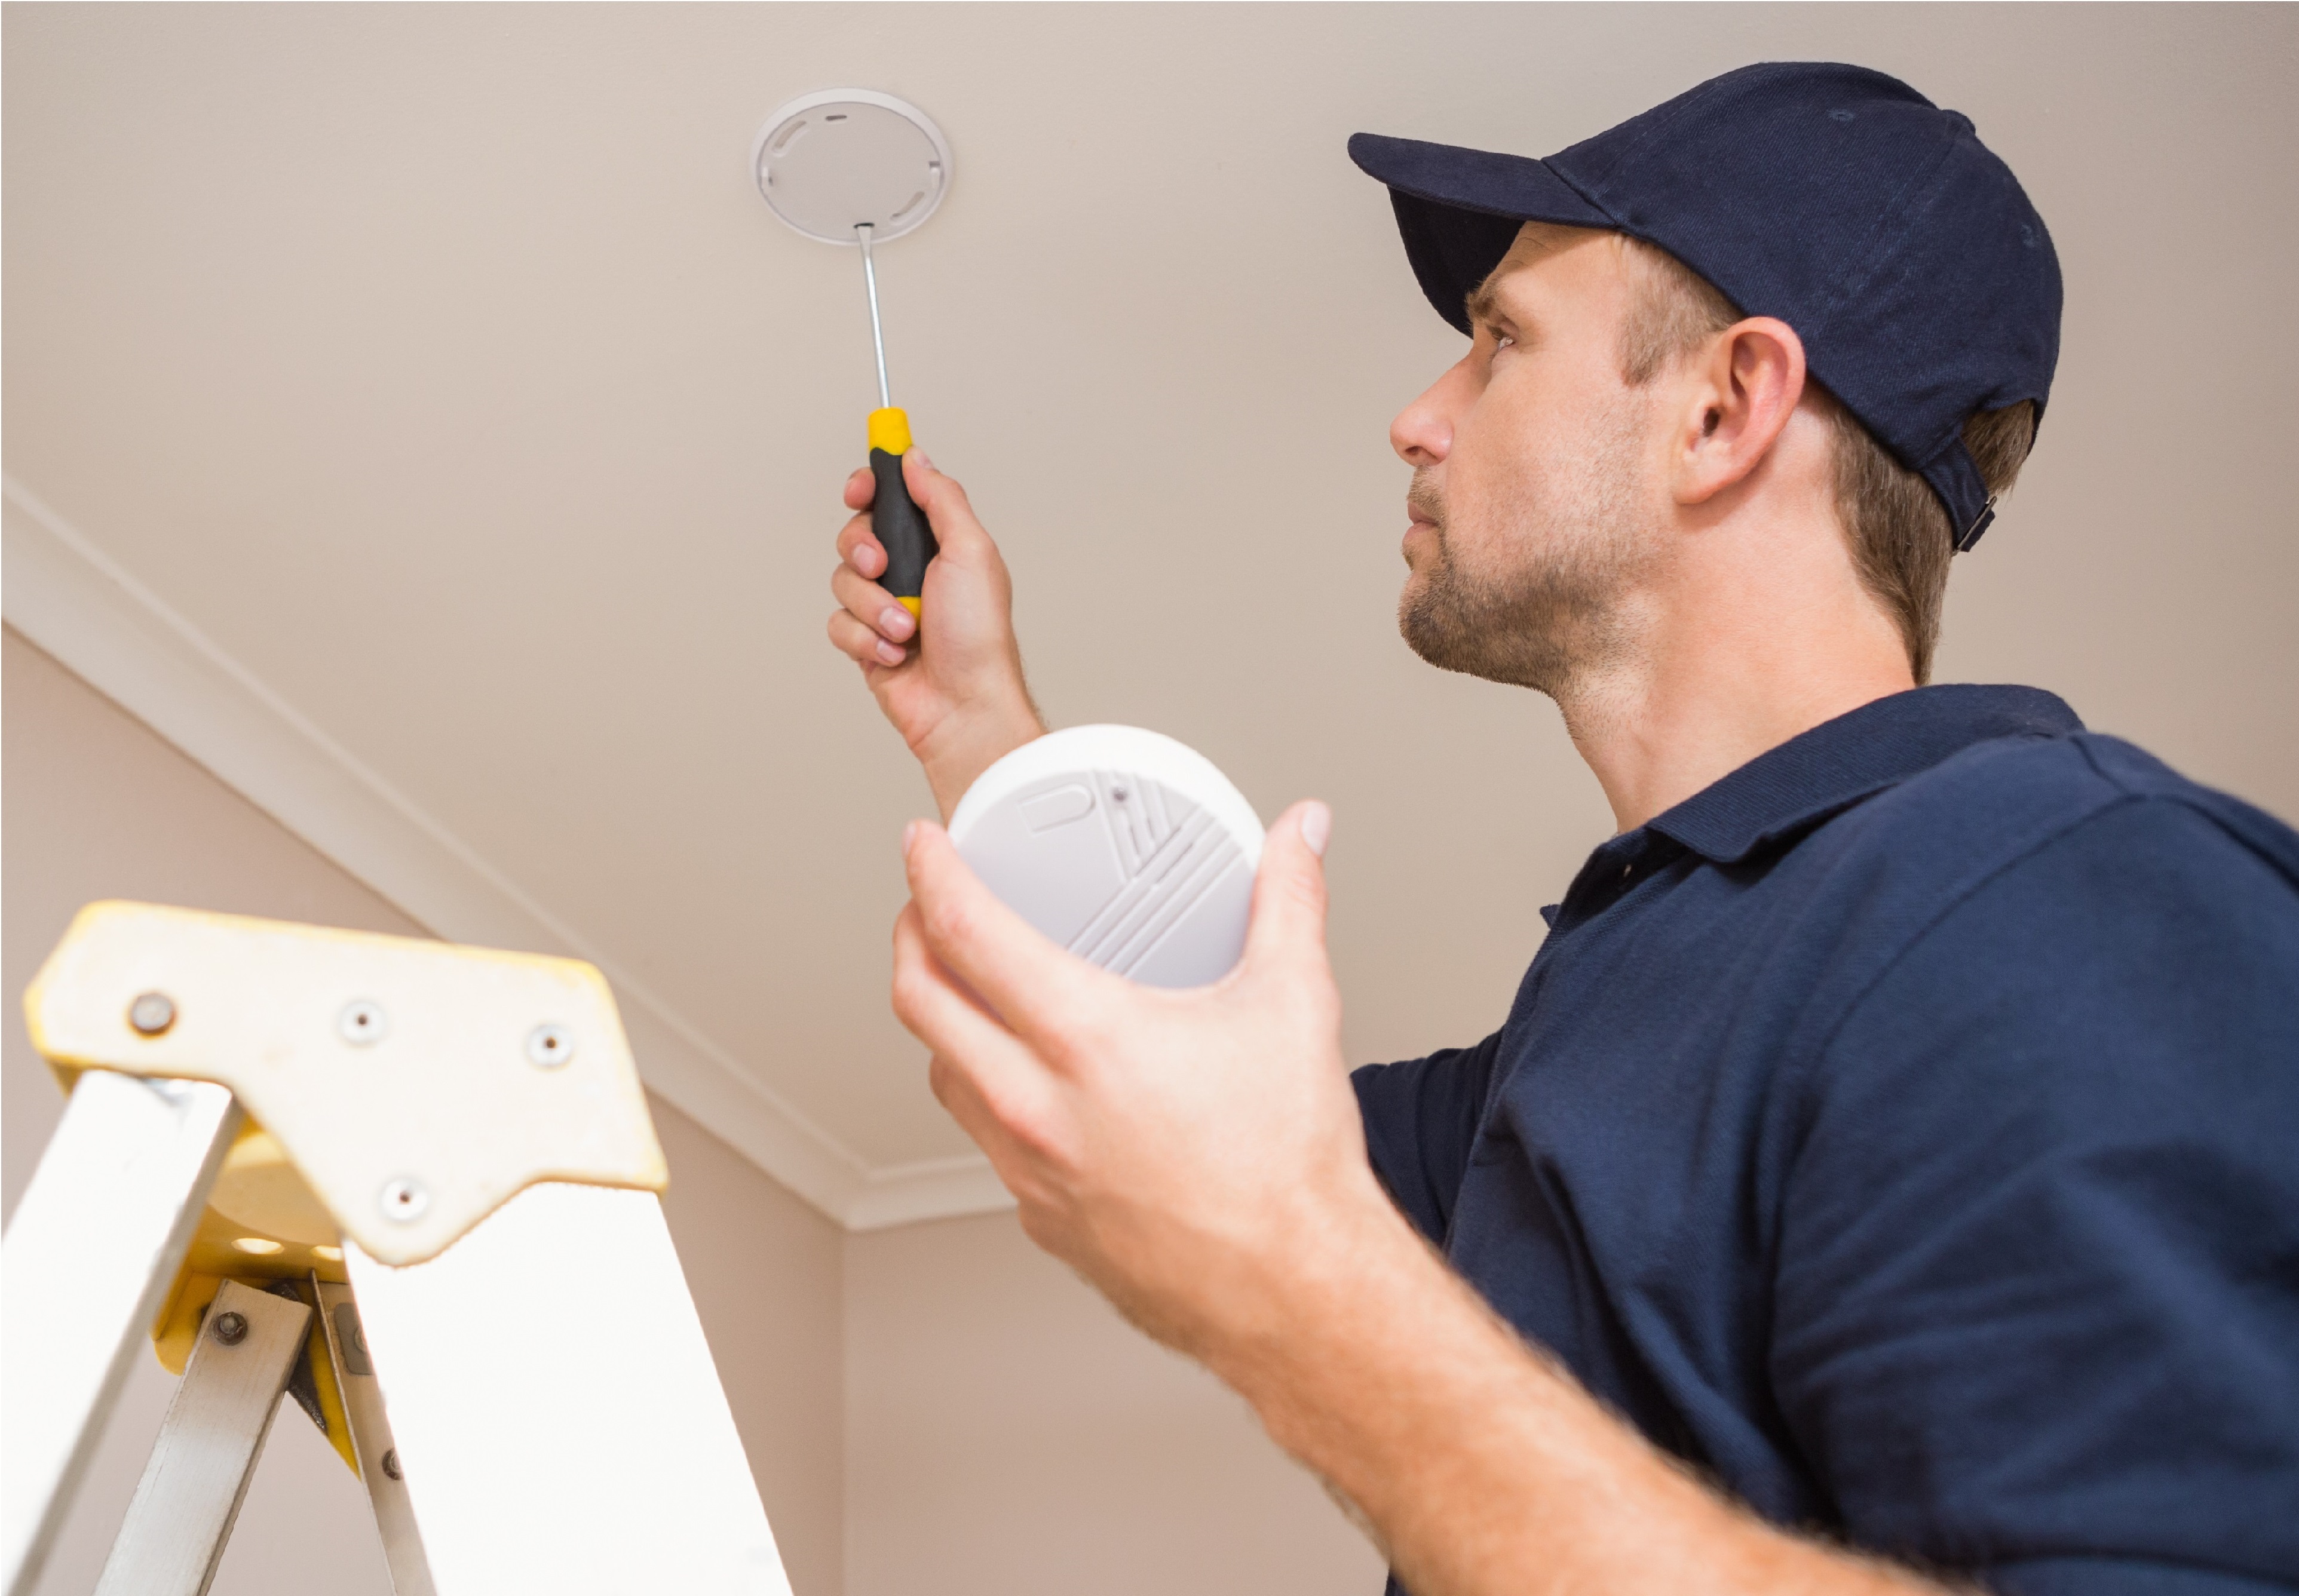 Handyman installing smoke detector with screwdriver on the ceiling